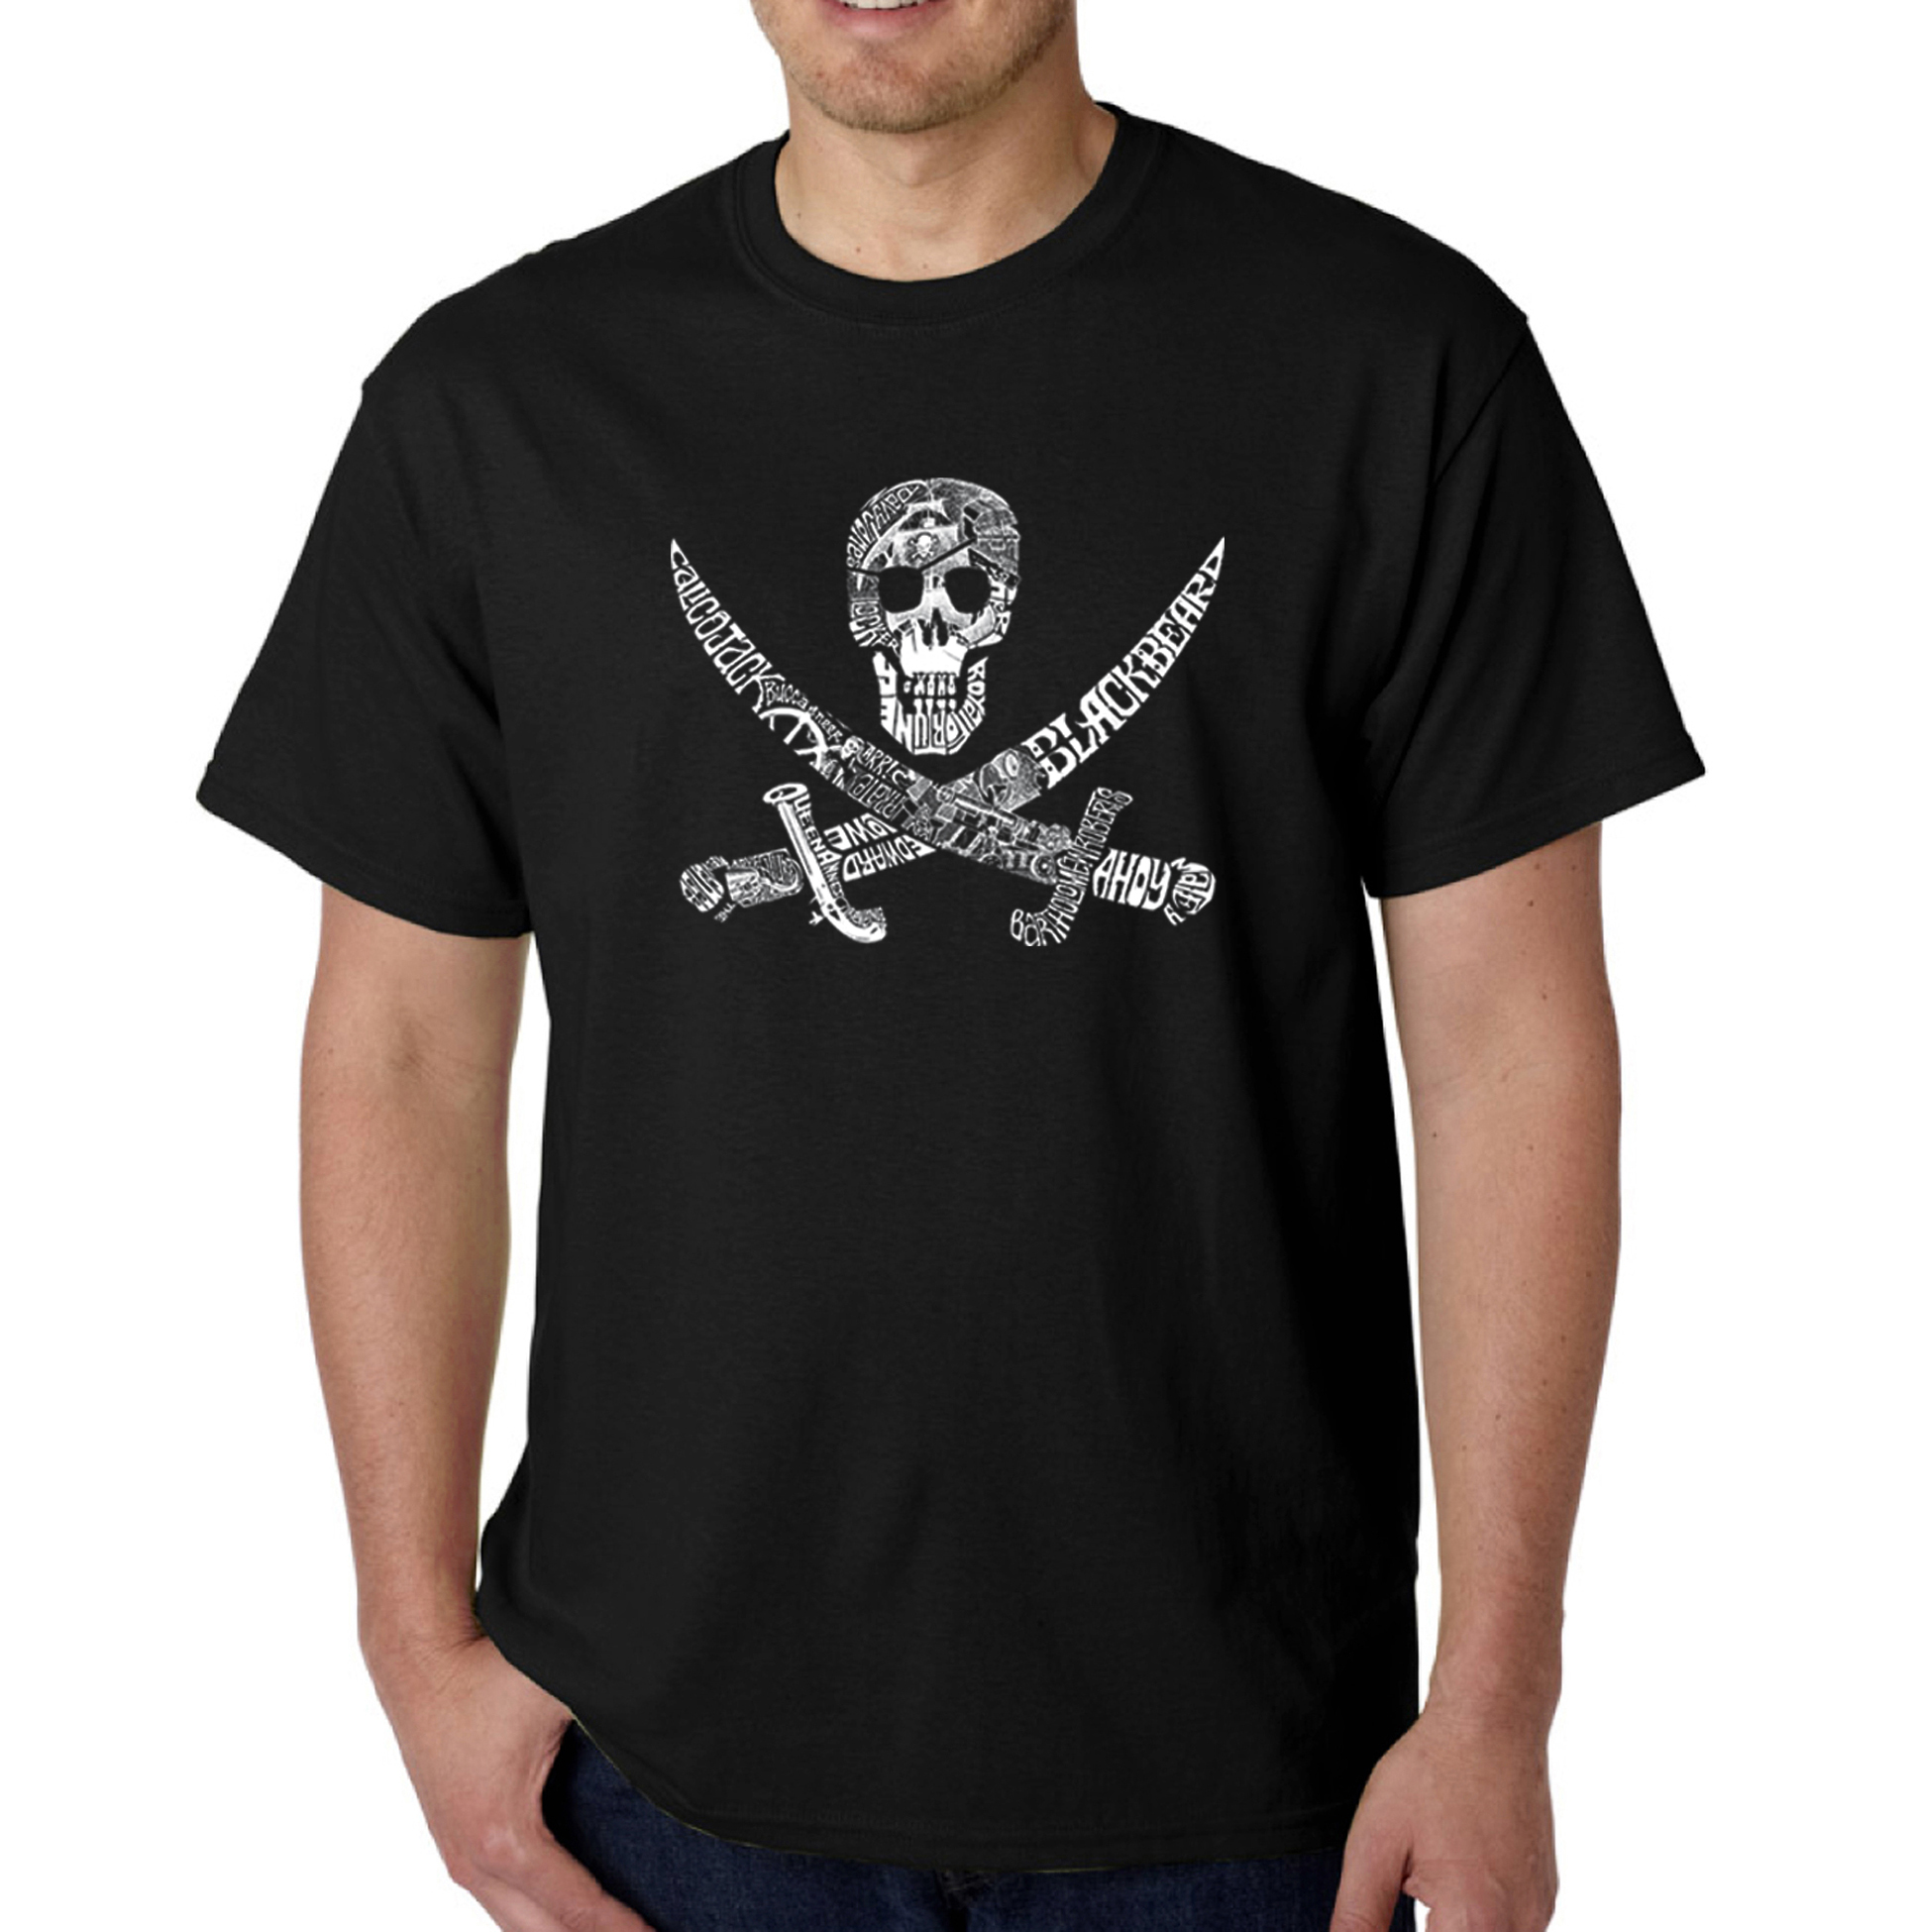 Los Angeles Pop Art Men's Word Art T-shirt - Pirate Captains, Ships and Imagery